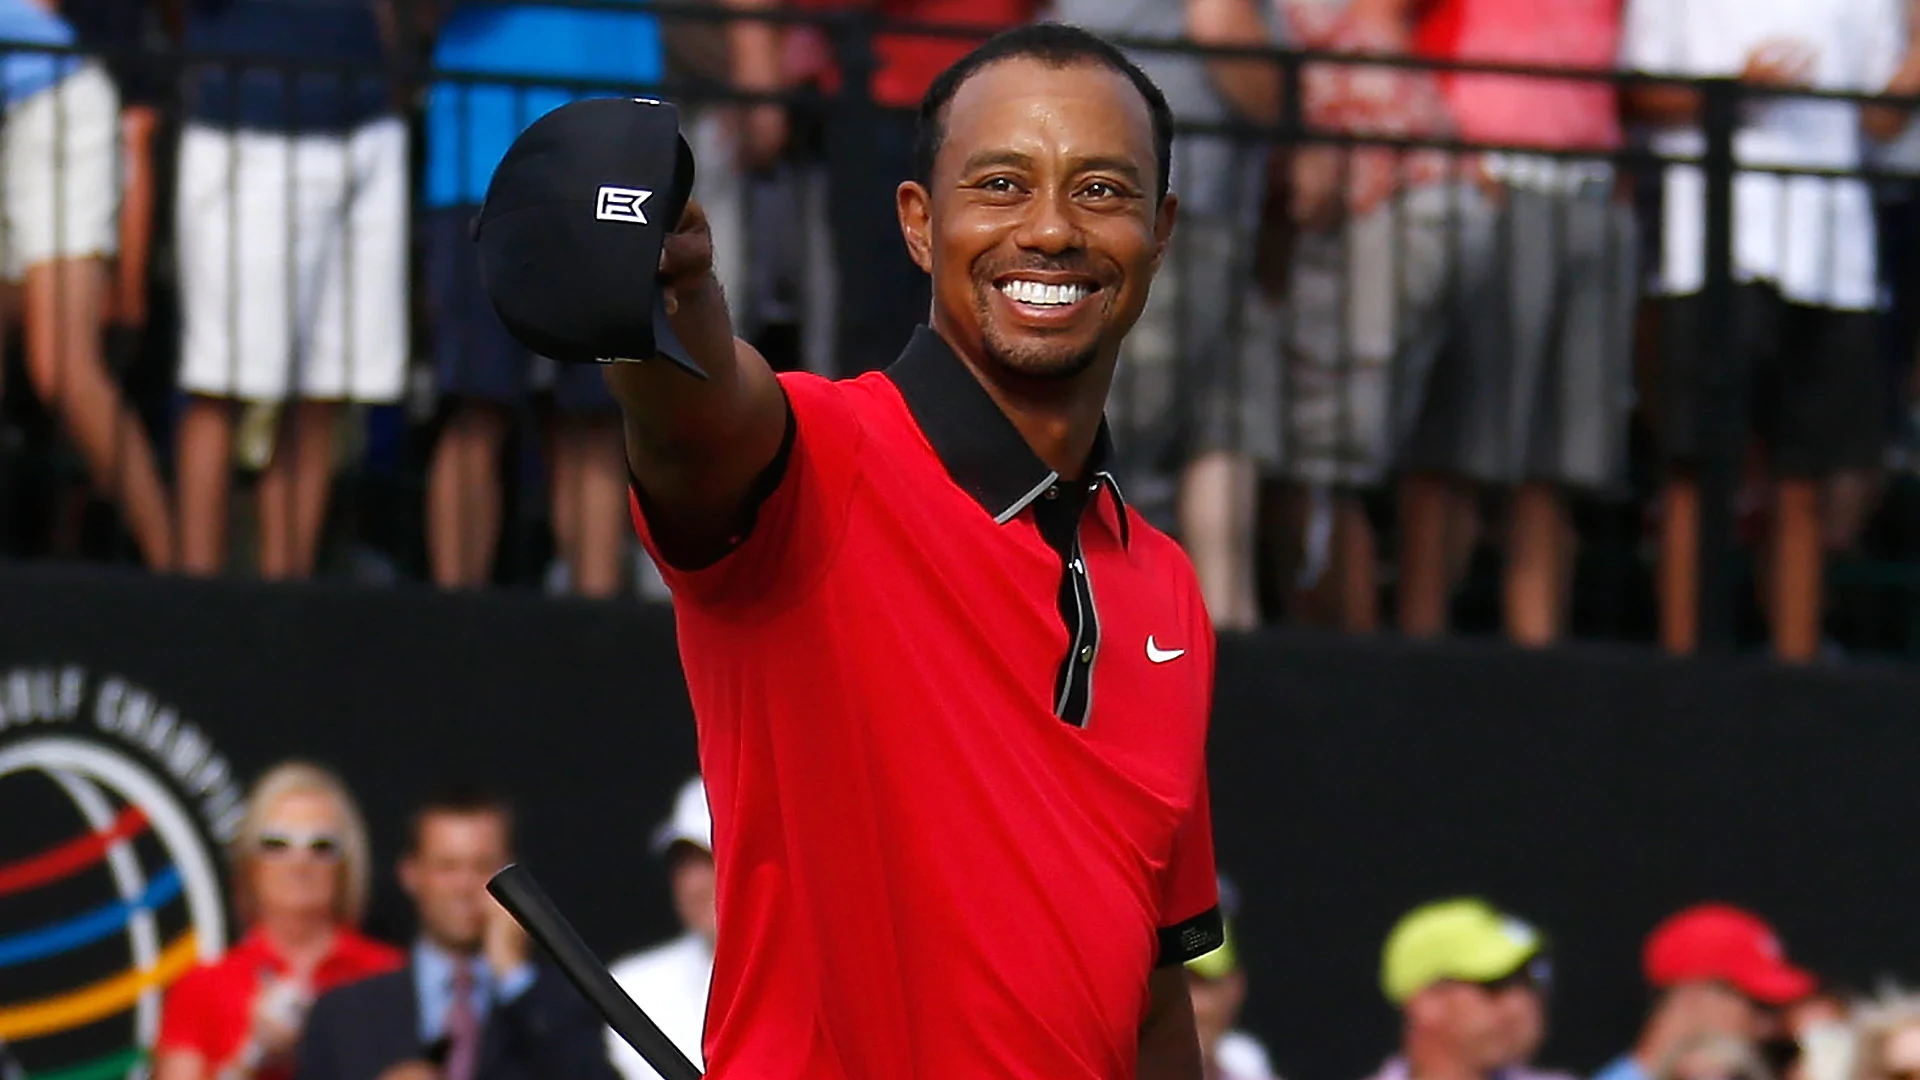 Stock Watch: Going all in on Tiger